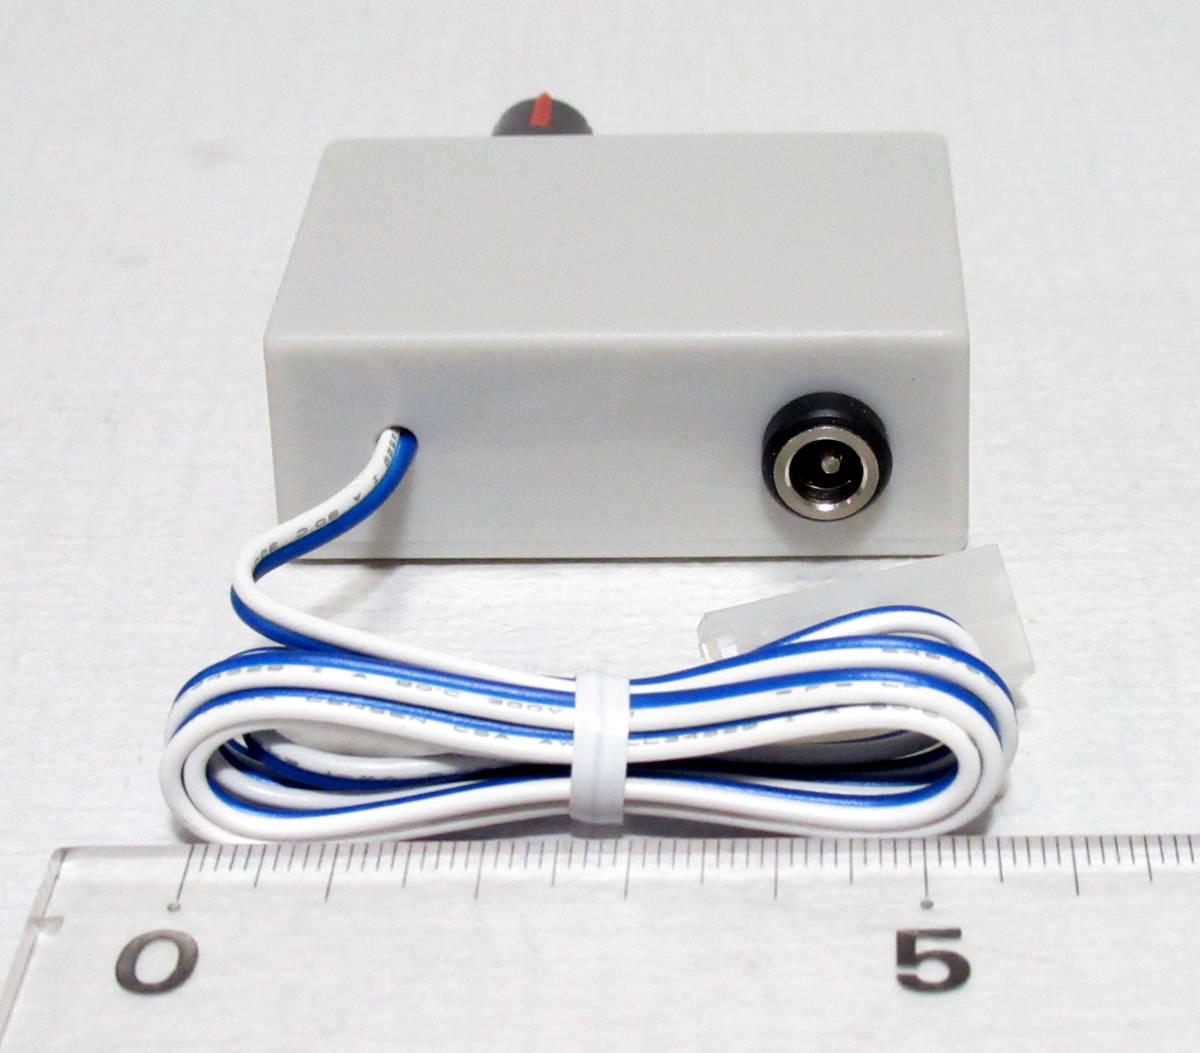  microminiature power pack KATO for PWM less -step speed control 12V1A case size 5.5cm x 4cm x 2cm